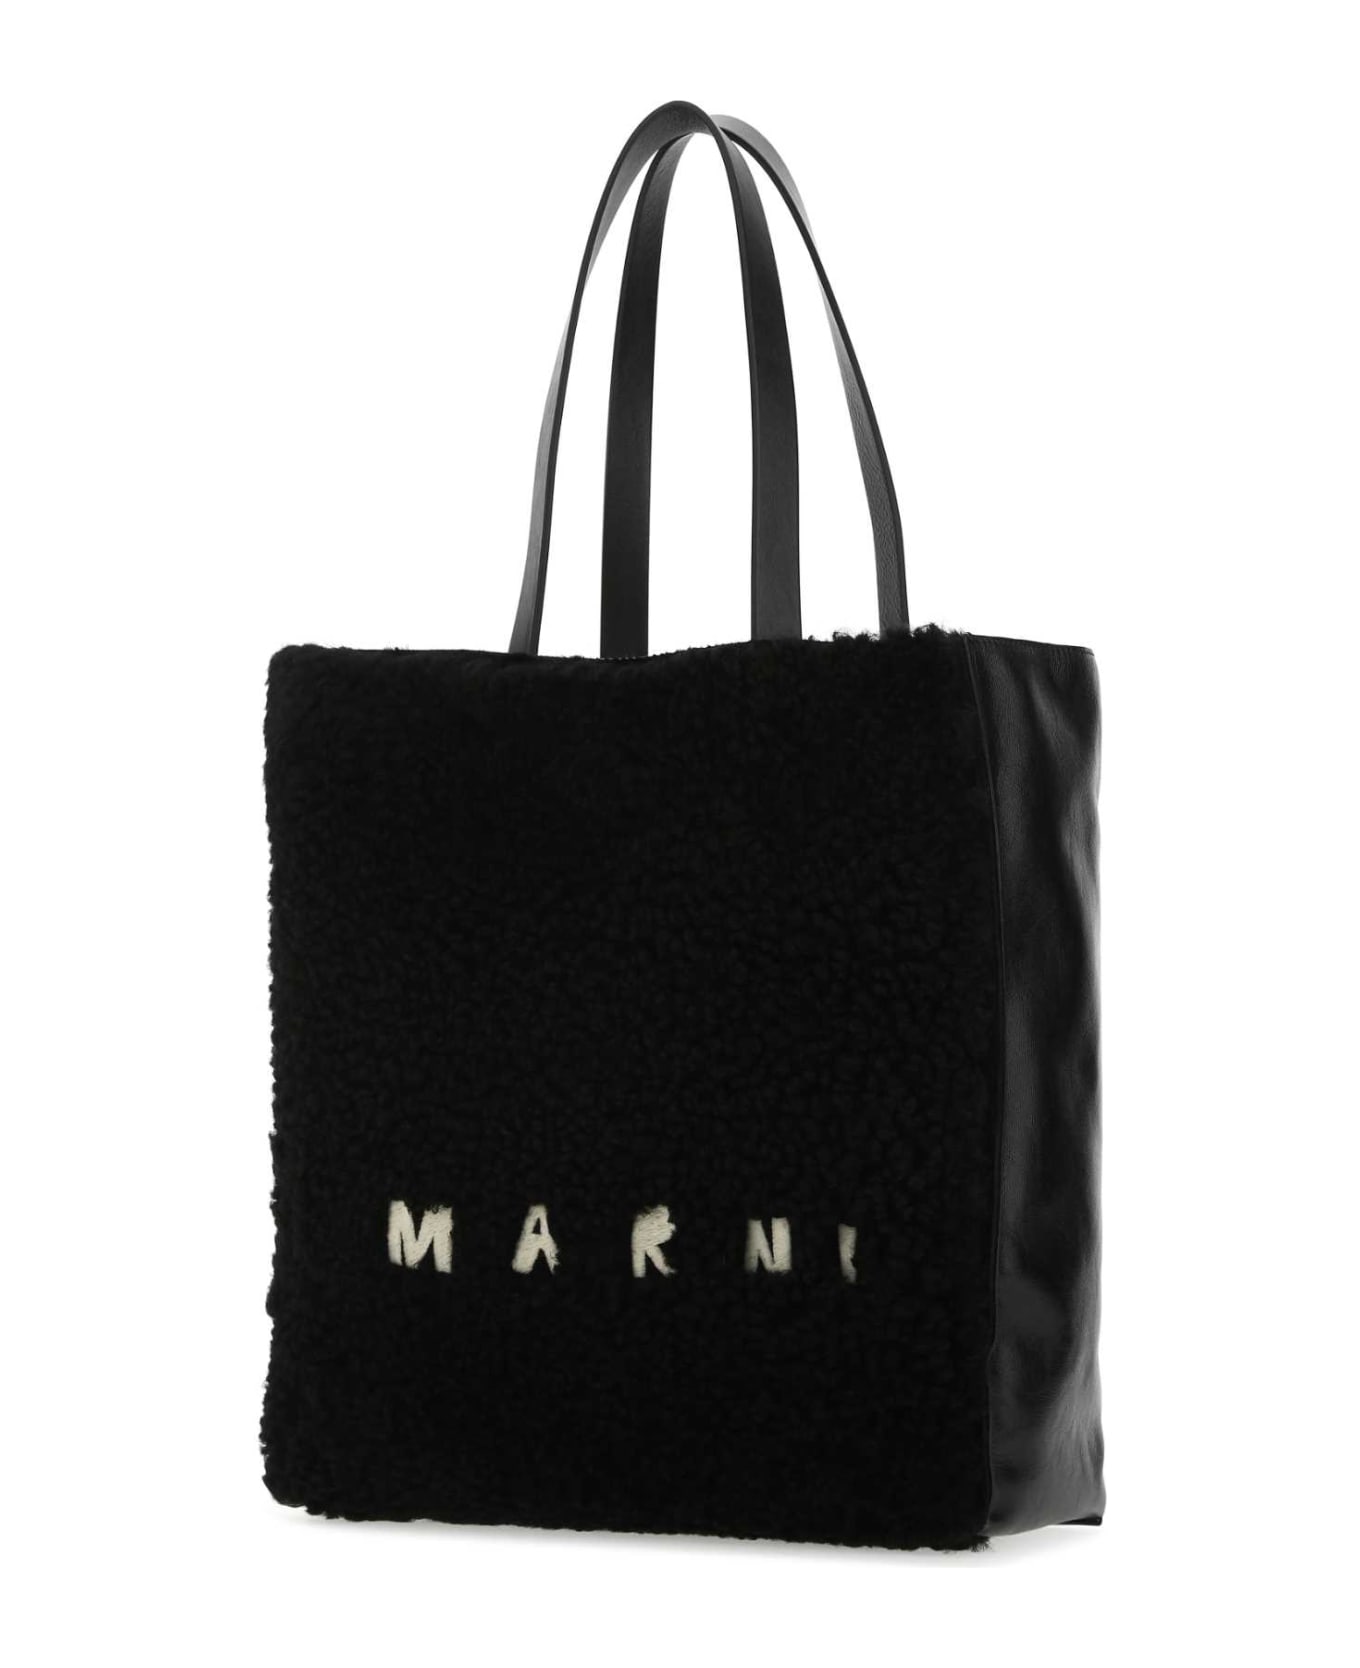 Marni Black Leather And Teddy Museo Shopping Bag - ZO185